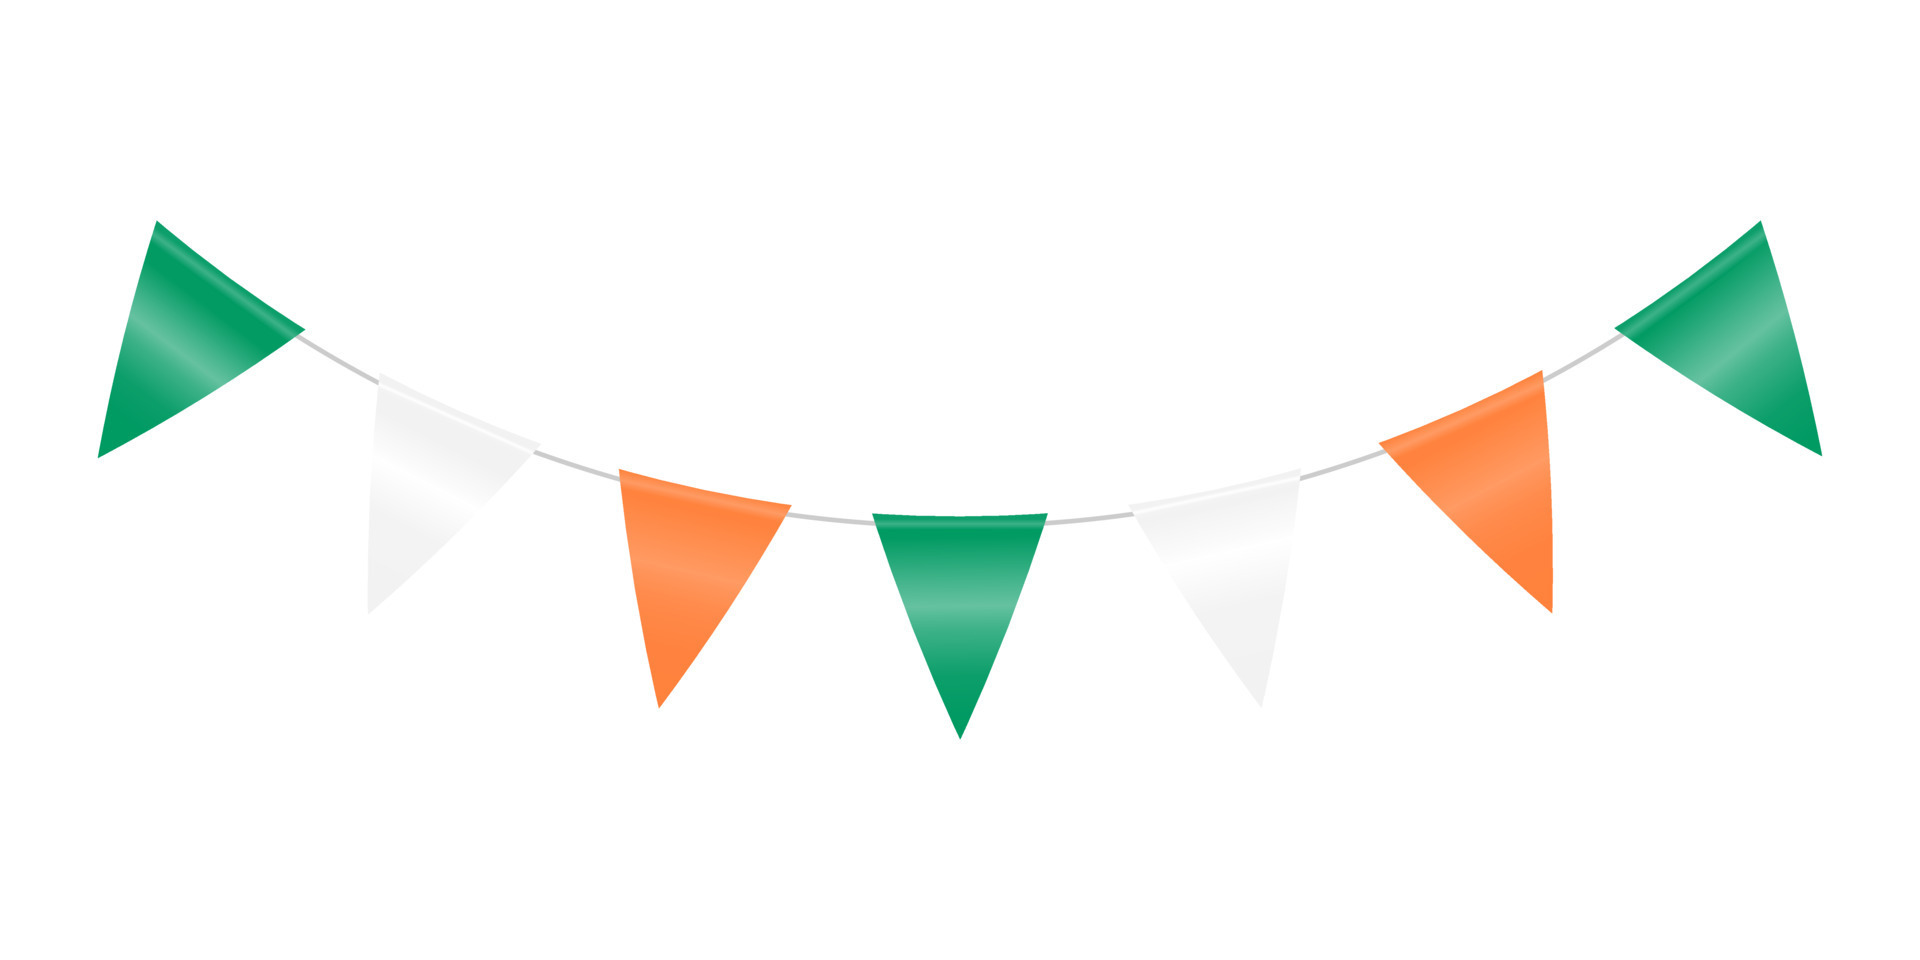 https://static.vecteezy.com/system/resources/previews/019/155/858/original/garland-with-flags-to-decorate-the-holiday-decor-from-colorful-triangular-flags-on-a-rope-festive-decor-illustration-vector.jpg